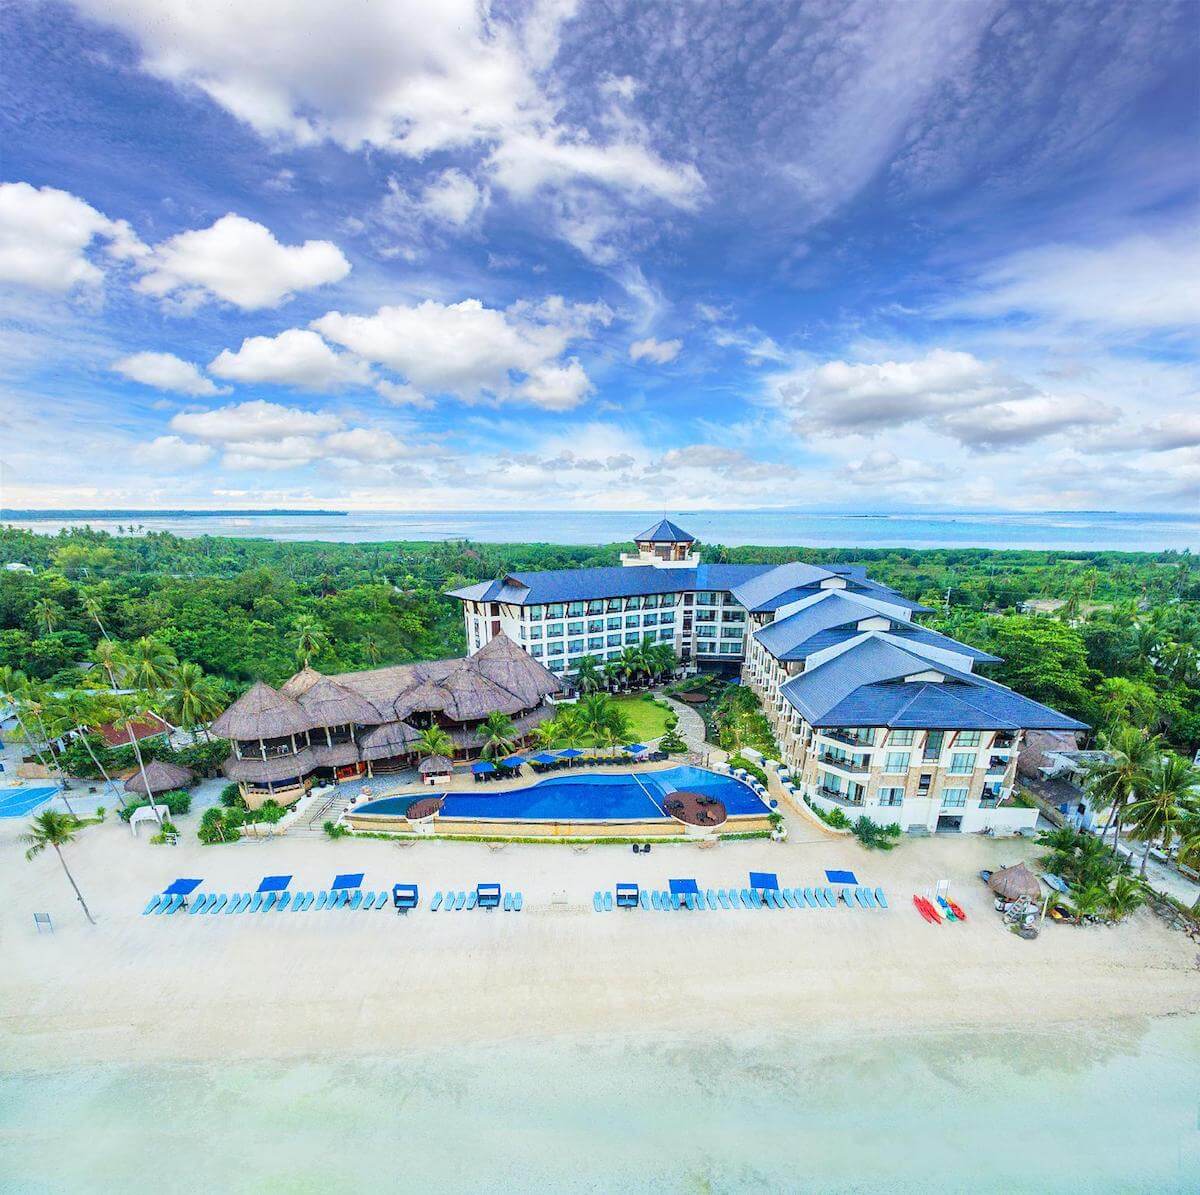 The Bellevue Resort is one of the eco-friendly Panglao resorts